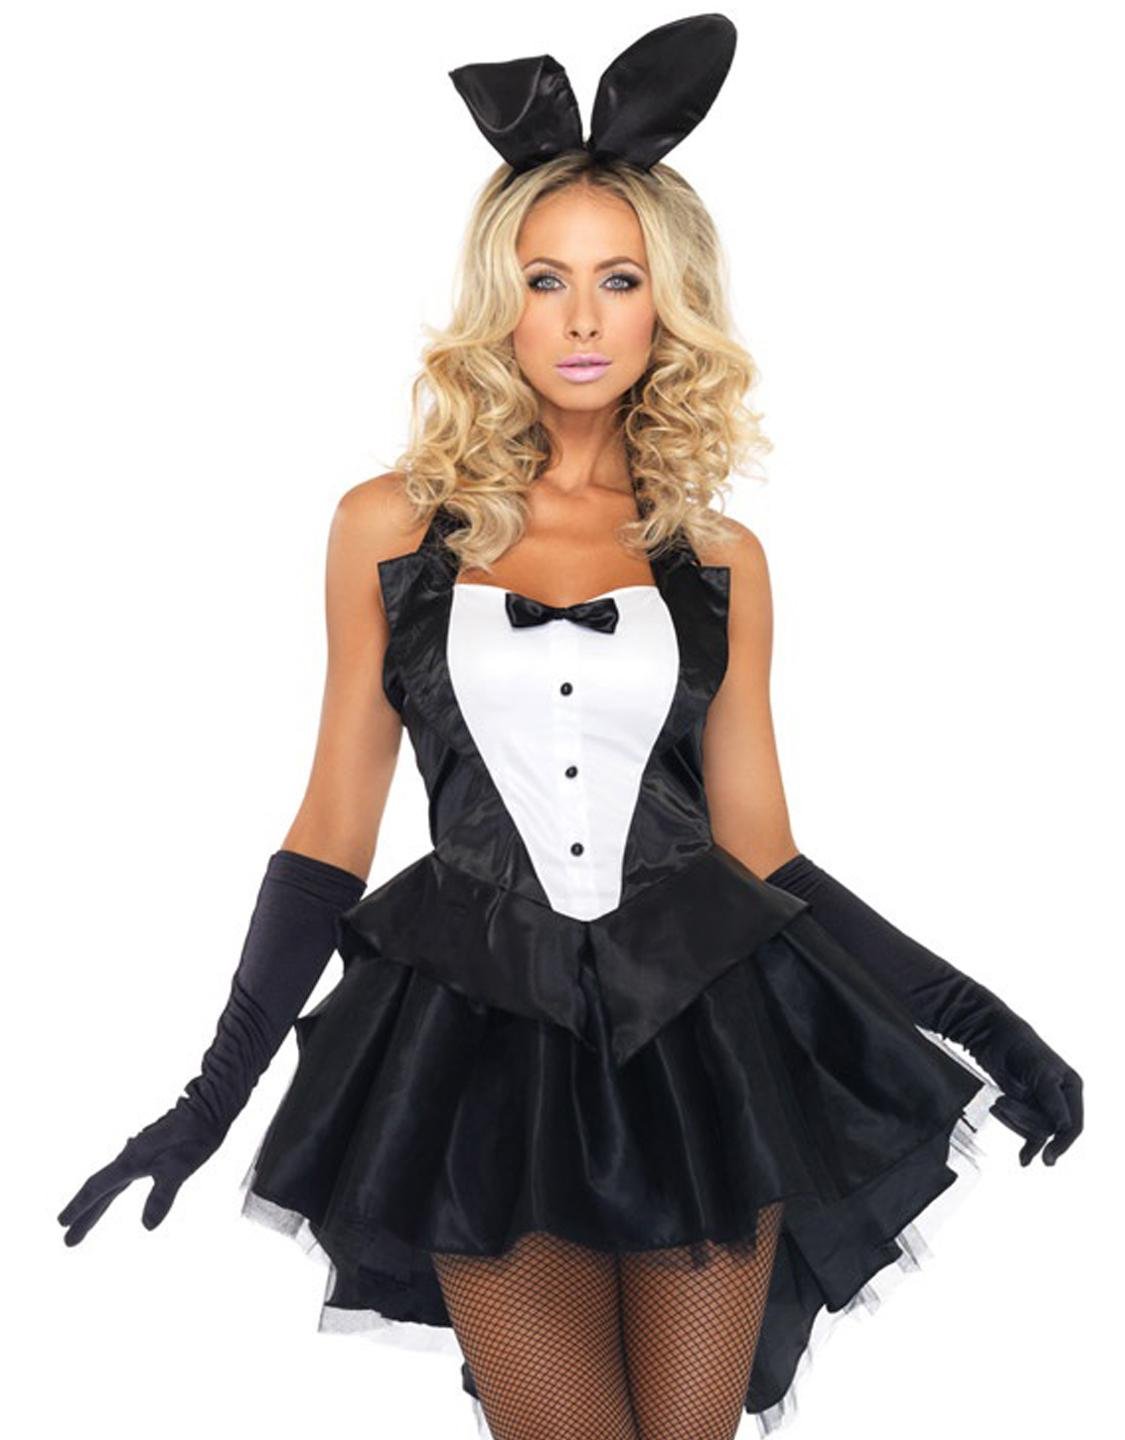 costumes with a black dress